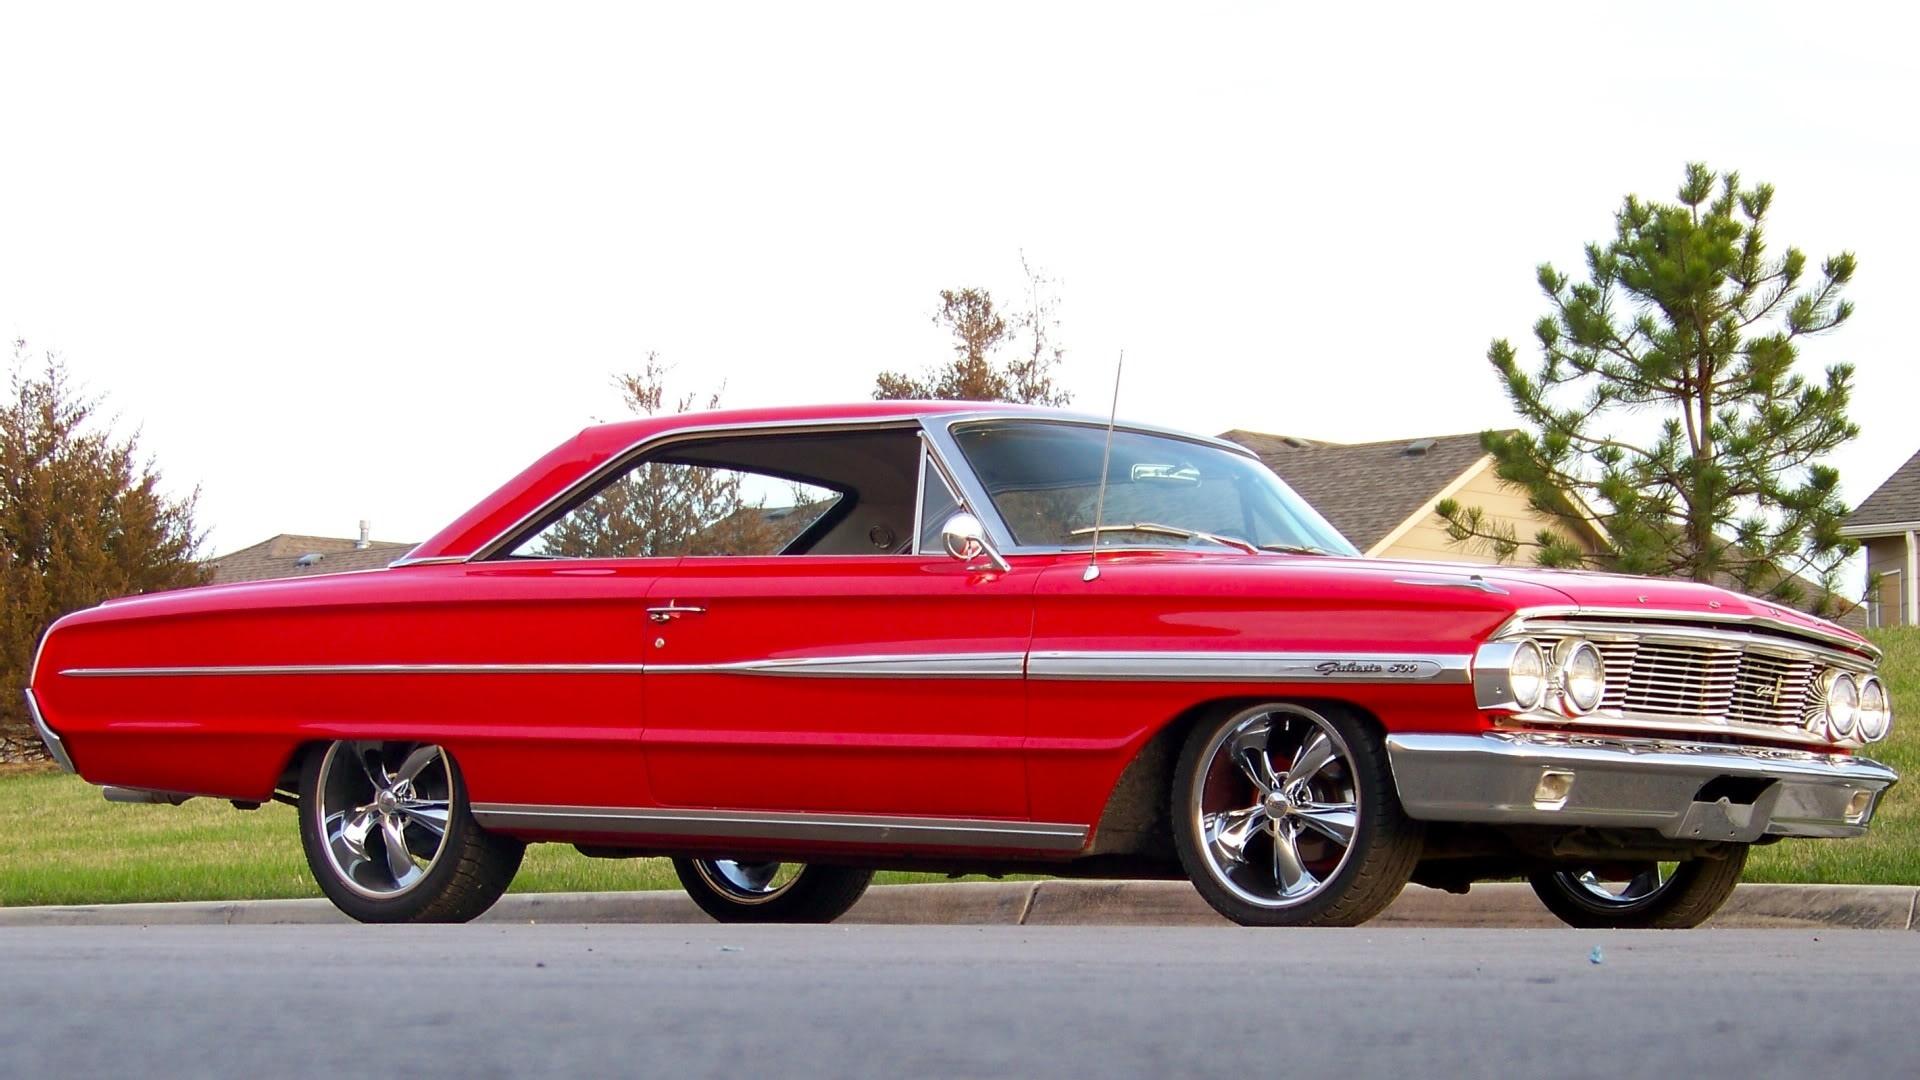 Ford Galaxie 500 wallpapers HD quality